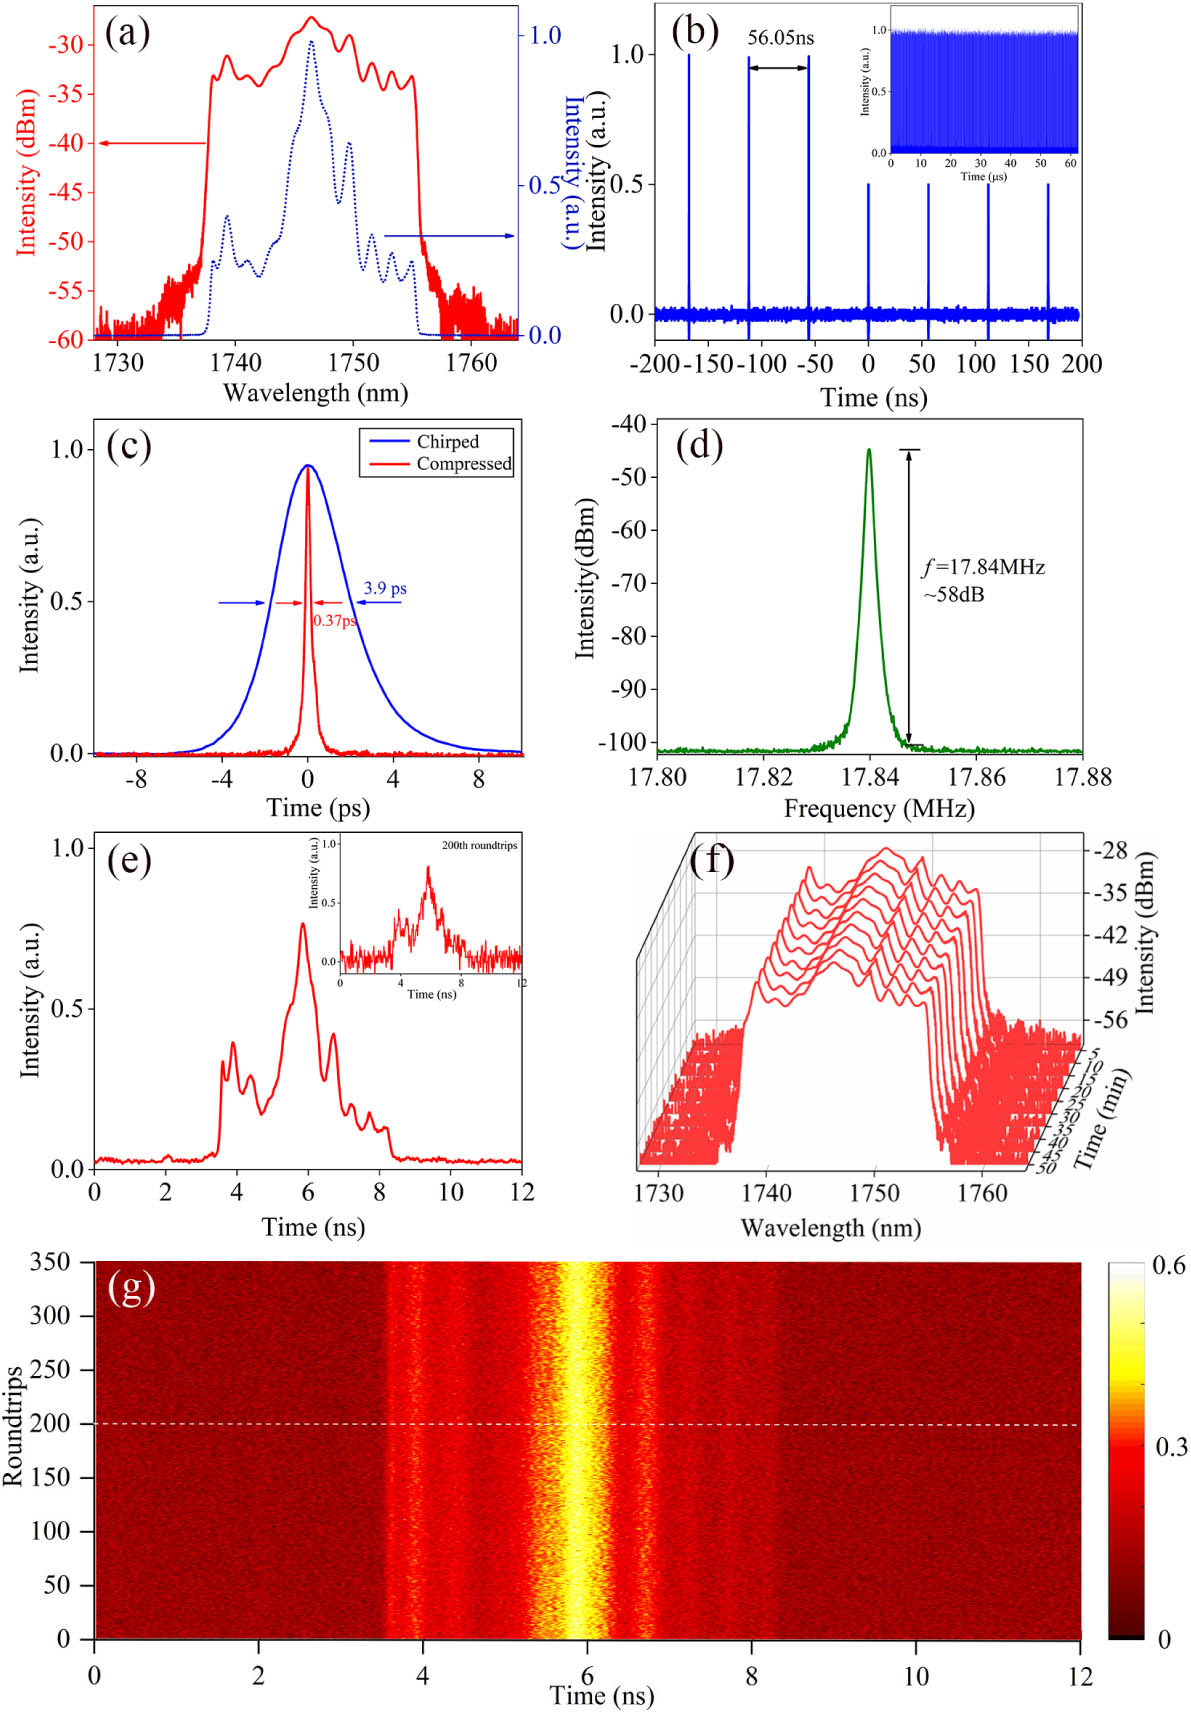 Single-pulse operation. (a) Mode-locked spectrum; (b) pulse train, inset: pulse train over 60 μs; (c) the measured autocorrelation trace of the uncompressed output pulse (blue) and the compressed pulse (red); (d) RF spectrum; (e) averaged shot-to-shot spectrum, inset: single-shot spectrum of the 200th round trip; (f) shot-to-shot spectrum with 350 round trips; (g) real-time spectral evolution by DFT.